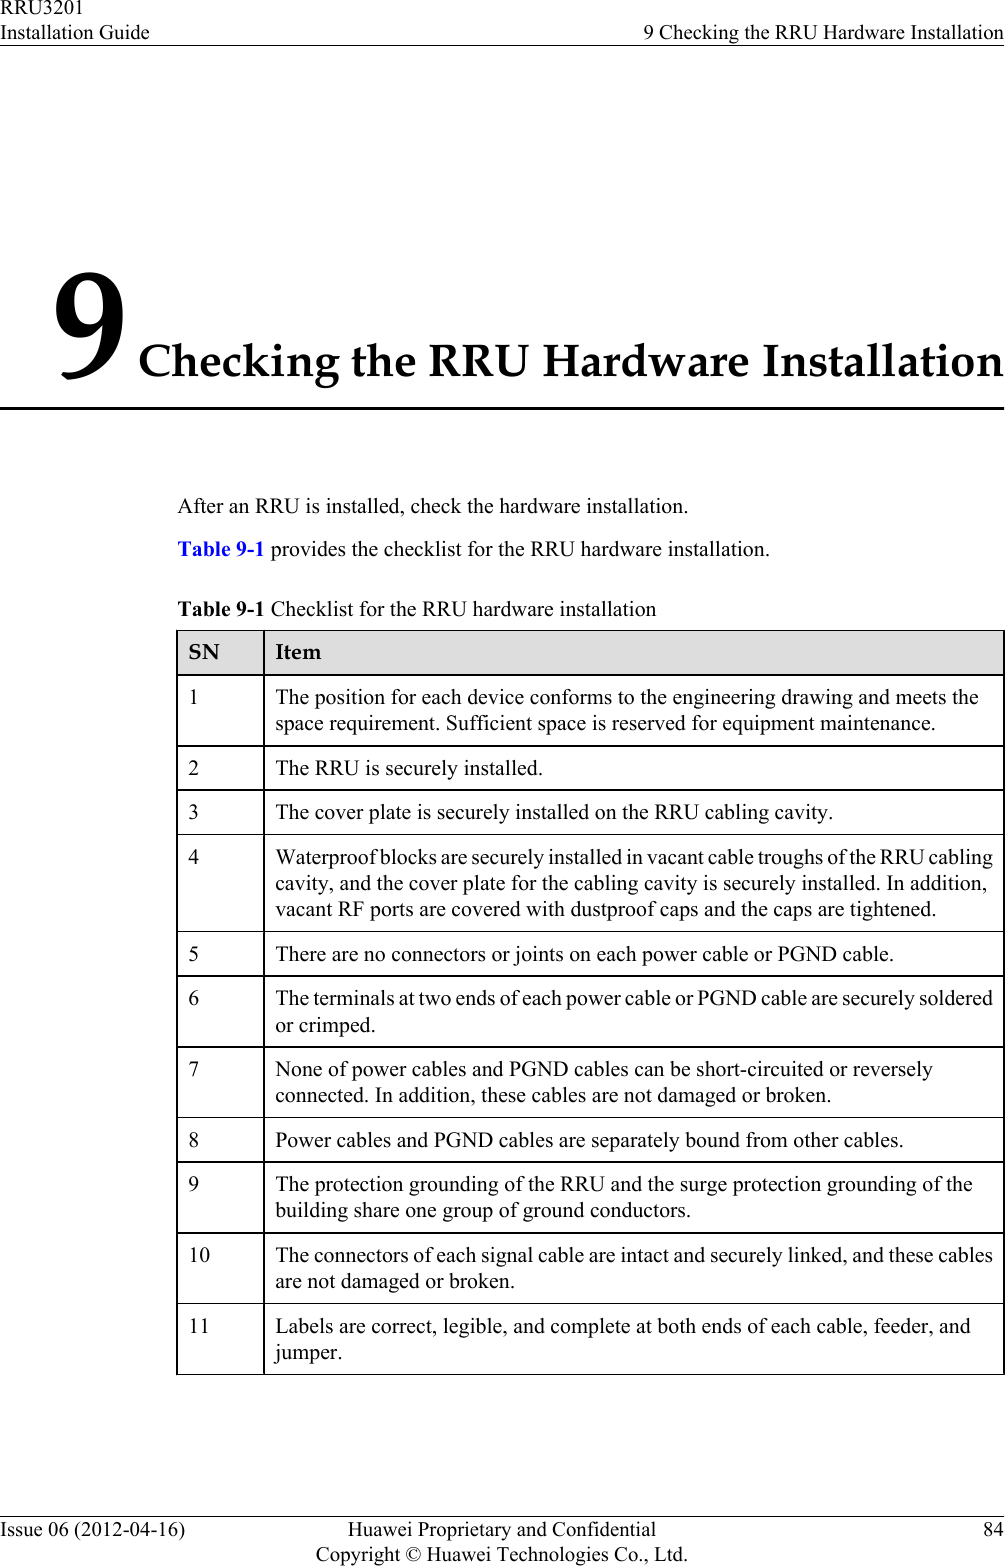 9 Checking the RRU Hardware InstallationAfter an RRU is installed, check the hardware installation.Table 9-1 provides the checklist for the RRU hardware installation.Table 9-1 Checklist for the RRU hardware installationSN Item1The position for each device conforms to the engineering drawing and meets thespace requirement. Sufficient space is reserved for equipment maintenance.2 The RRU is securely installed.3 The cover plate is securely installed on the RRU cabling cavity.4 Waterproof blocks are securely installed in vacant cable troughs of the RRU cablingcavity, and the cover plate for the cabling cavity is securely installed. In addition,vacant RF ports are covered with dustproof caps and the caps are tightened.5 There are no connectors or joints on each power cable or PGND cable.6 The terminals at two ends of each power cable or PGND cable are securely solderedor crimped.7 None of power cables and PGND cables can be short-circuited or reverselyconnected. In addition, these cables are not damaged or broken.8 Power cables and PGND cables are separately bound from other cables.9 The protection grounding of the RRU and the surge protection grounding of thebuilding share one group of ground conductors.10 The connectors of each signal cable are intact and securely linked, and these cablesare not damaged or broken.11 Labels are correct, legible, and complete at both ends of each cable, feeder, andjumper.RRU3201Installation Guide 9 Checking the RRU Hardware InstallationIssue 06 (2012-04-16) Huawei Proprietary and ConfidentialCopyright © Huawei Technologies Co., Ltd.84